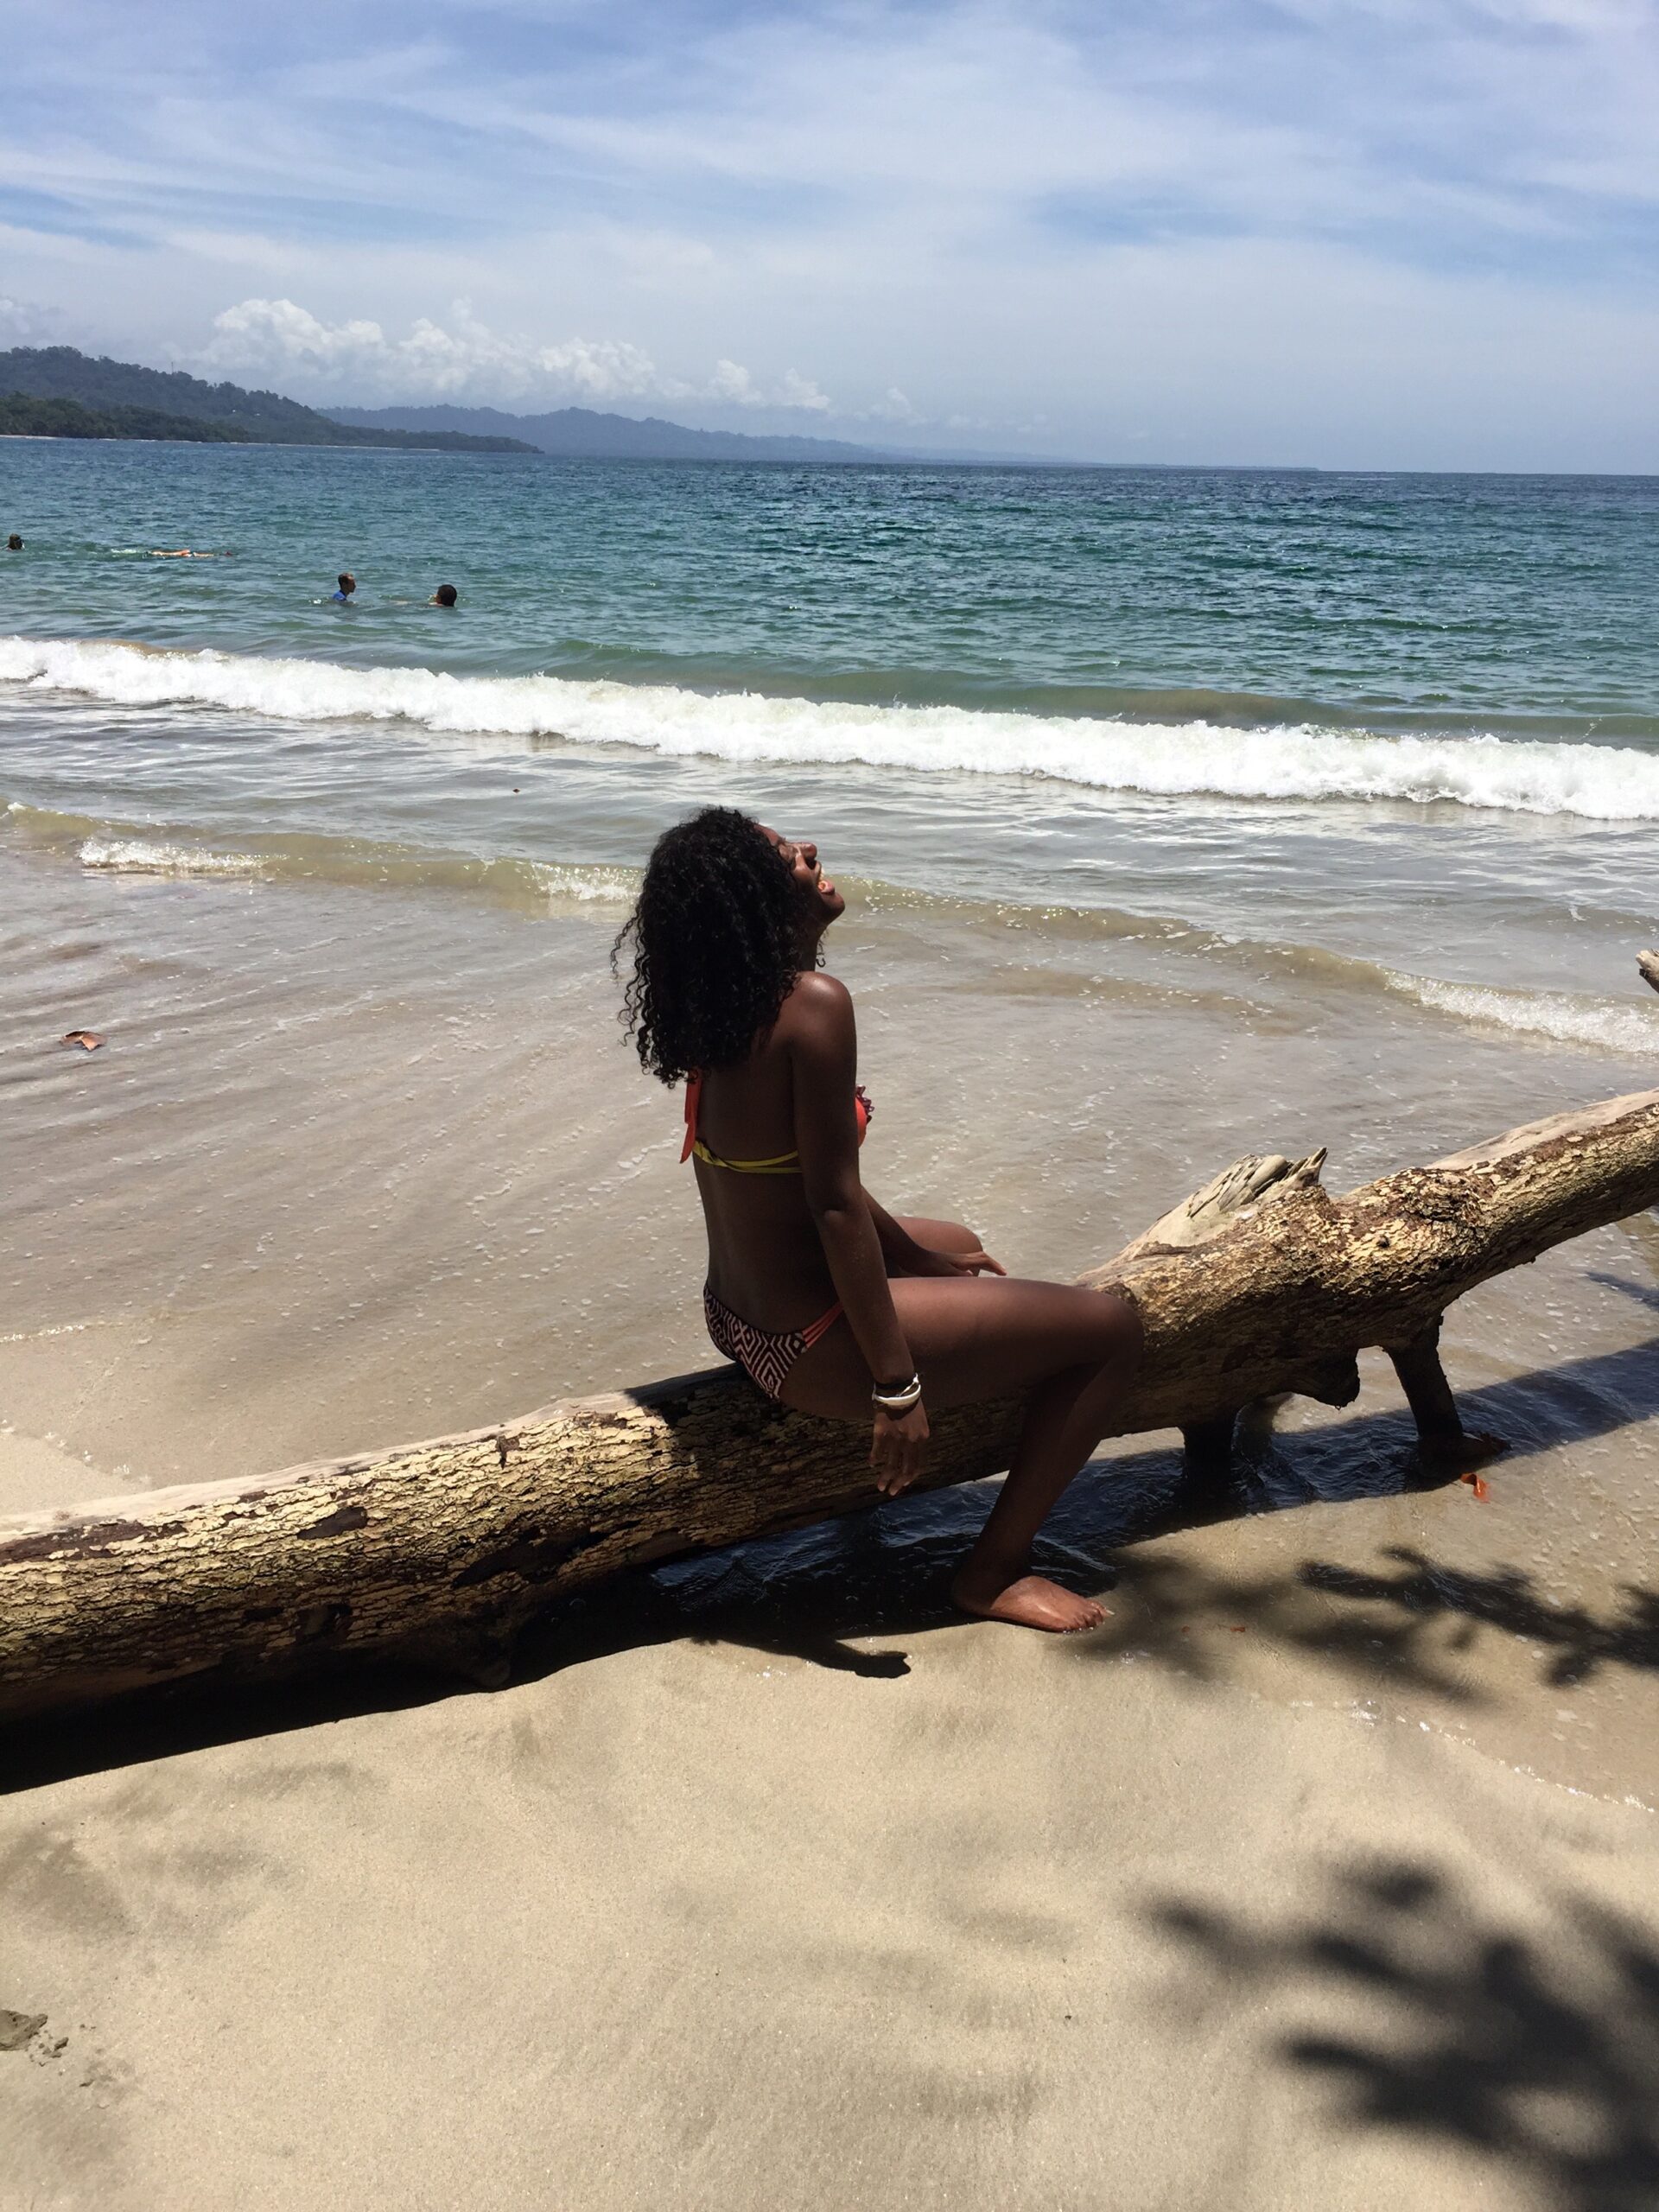 A Guide to Puerto Viejo, Costa Rica - The Caribbean Coast